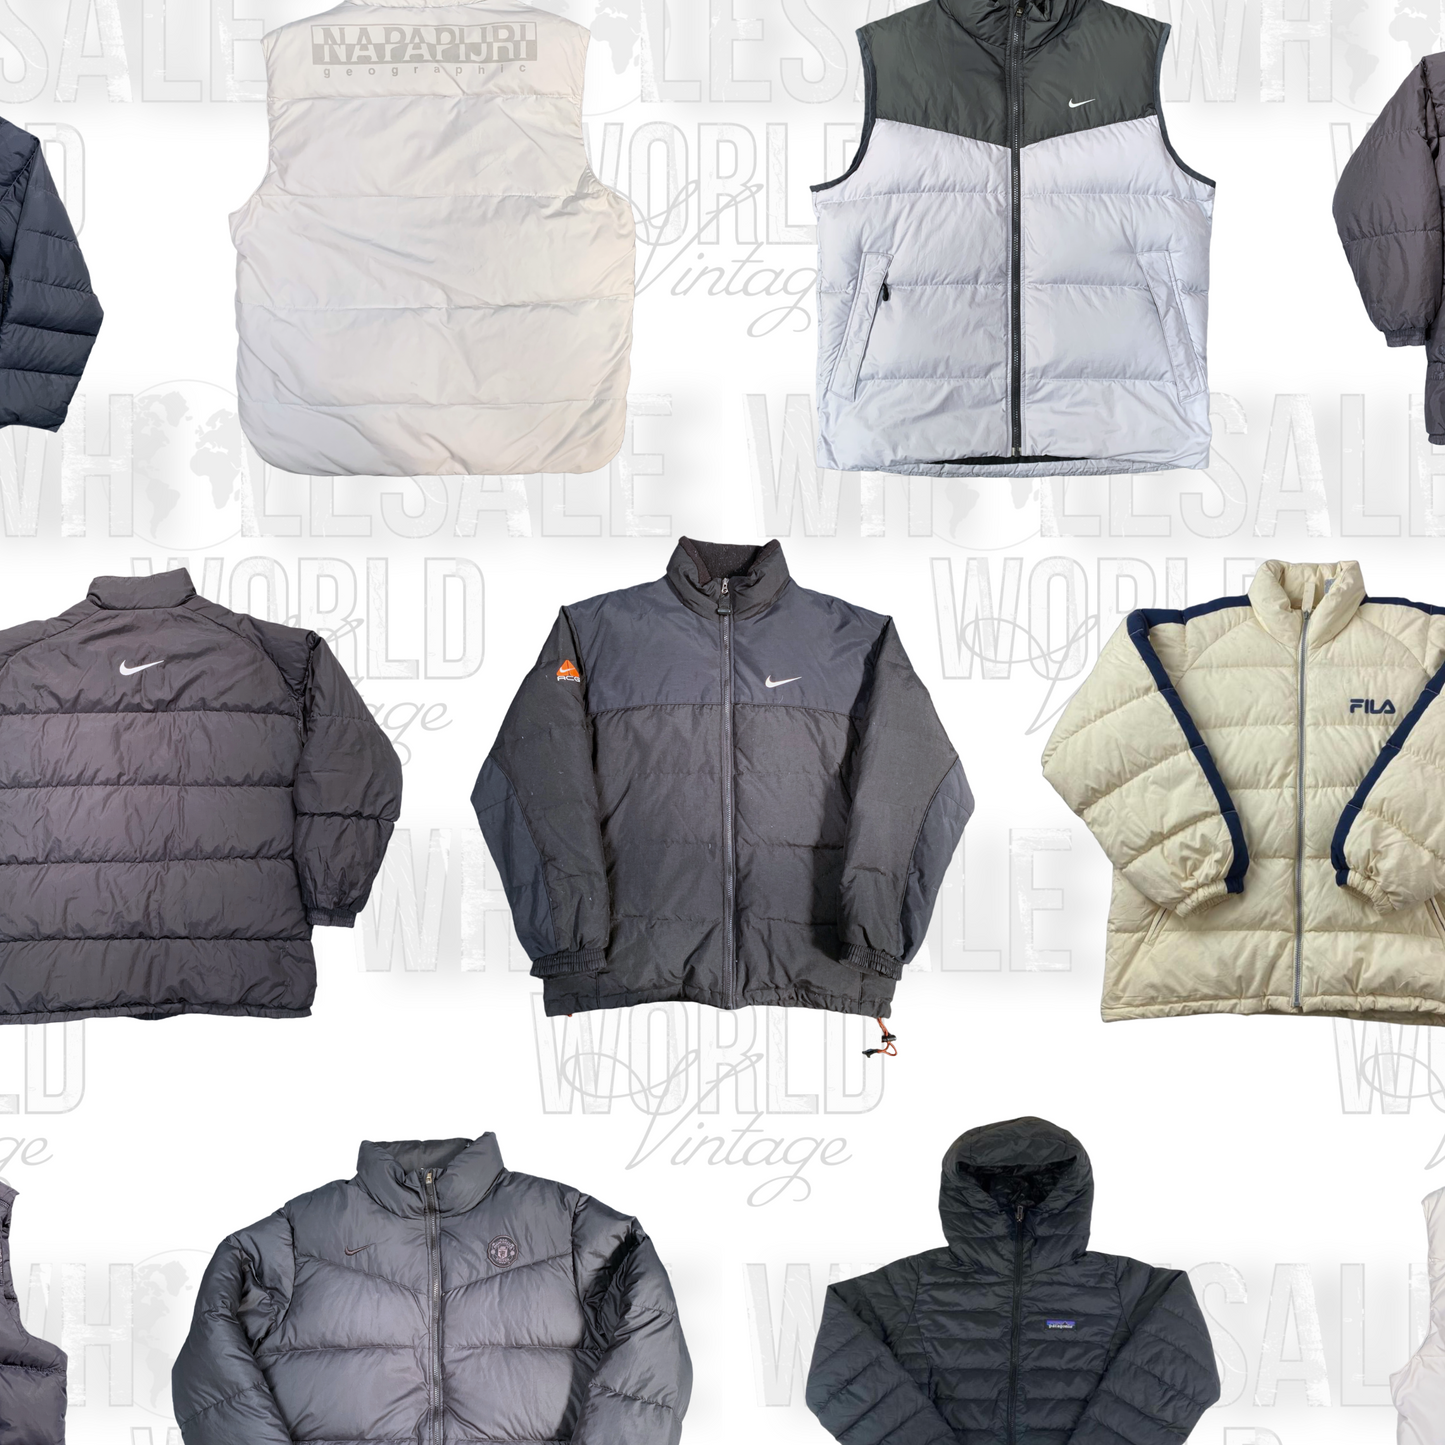 PREMIUM VINTAGE BRANDED PUFFER JACKETS - GRADE A - 25pc